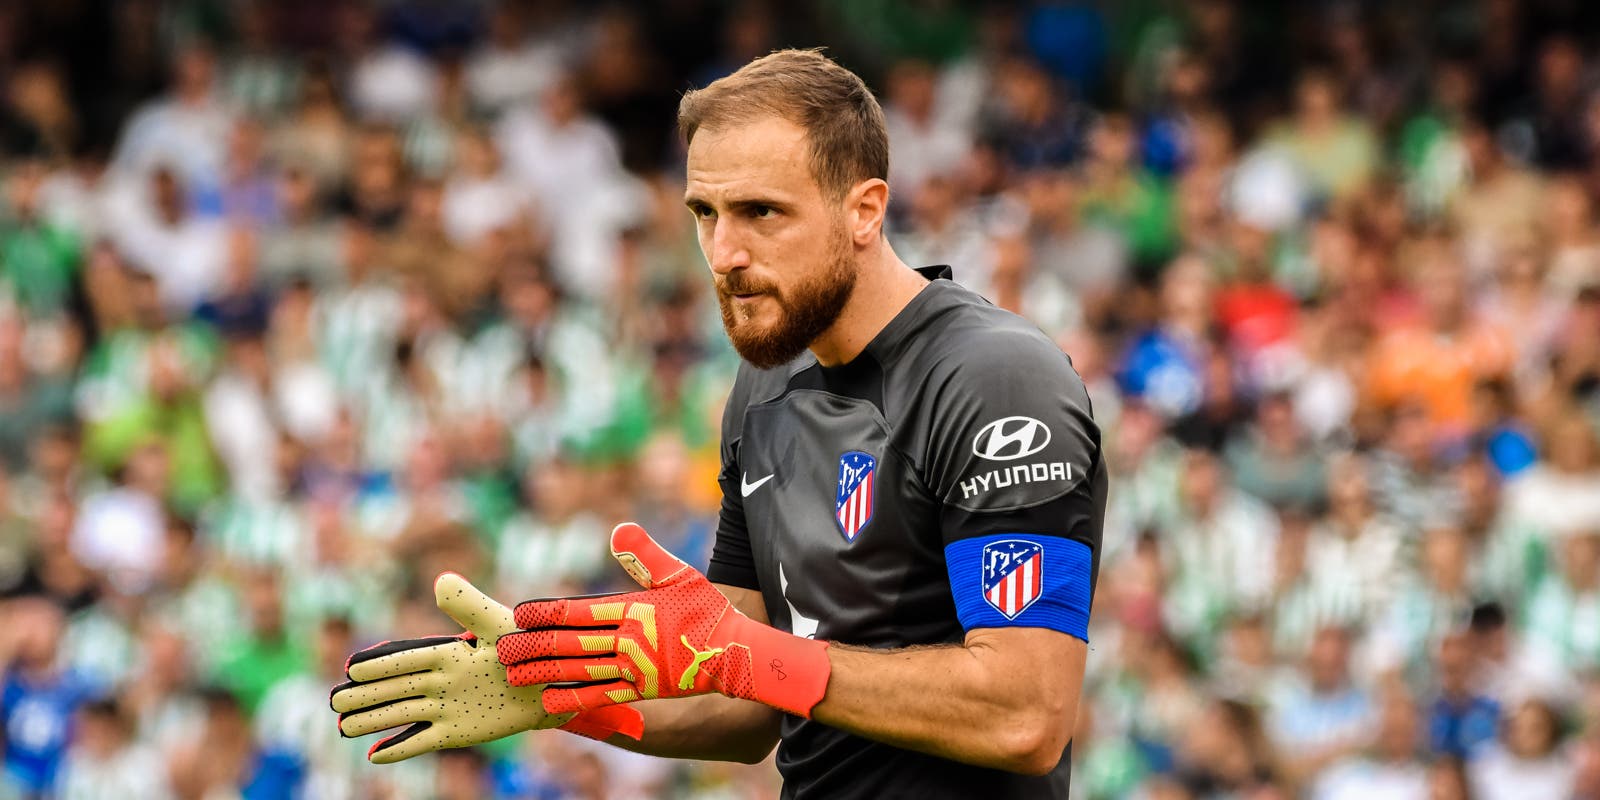 The surreal relief of Atlético for Oblak: a confessed Real Madrid player
	
